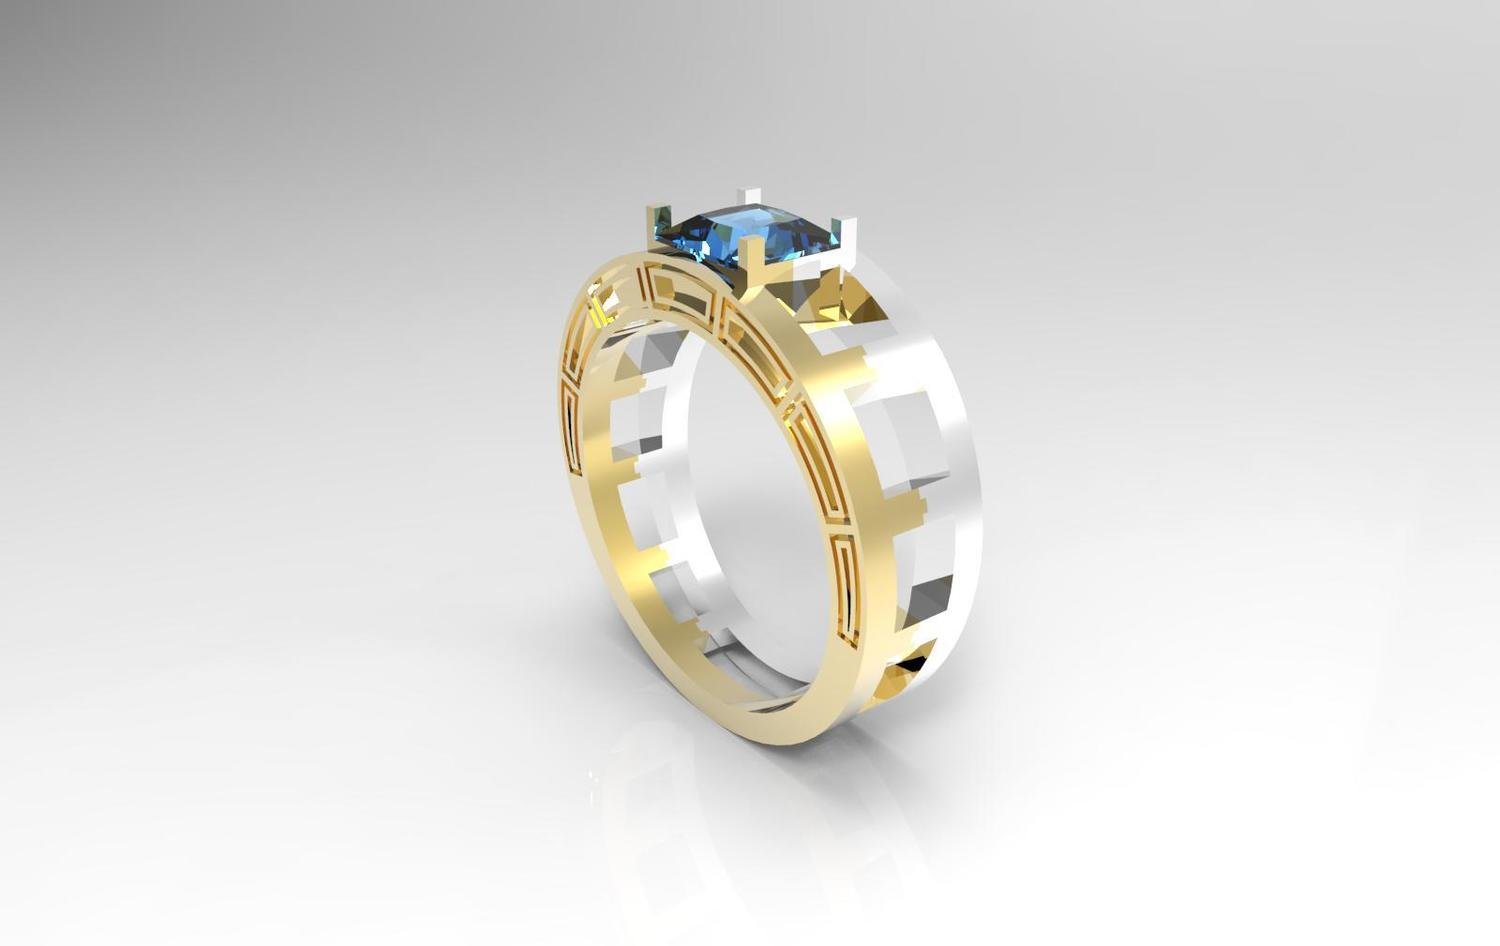 3D CAD Model of Anniversary Ring with Diamond